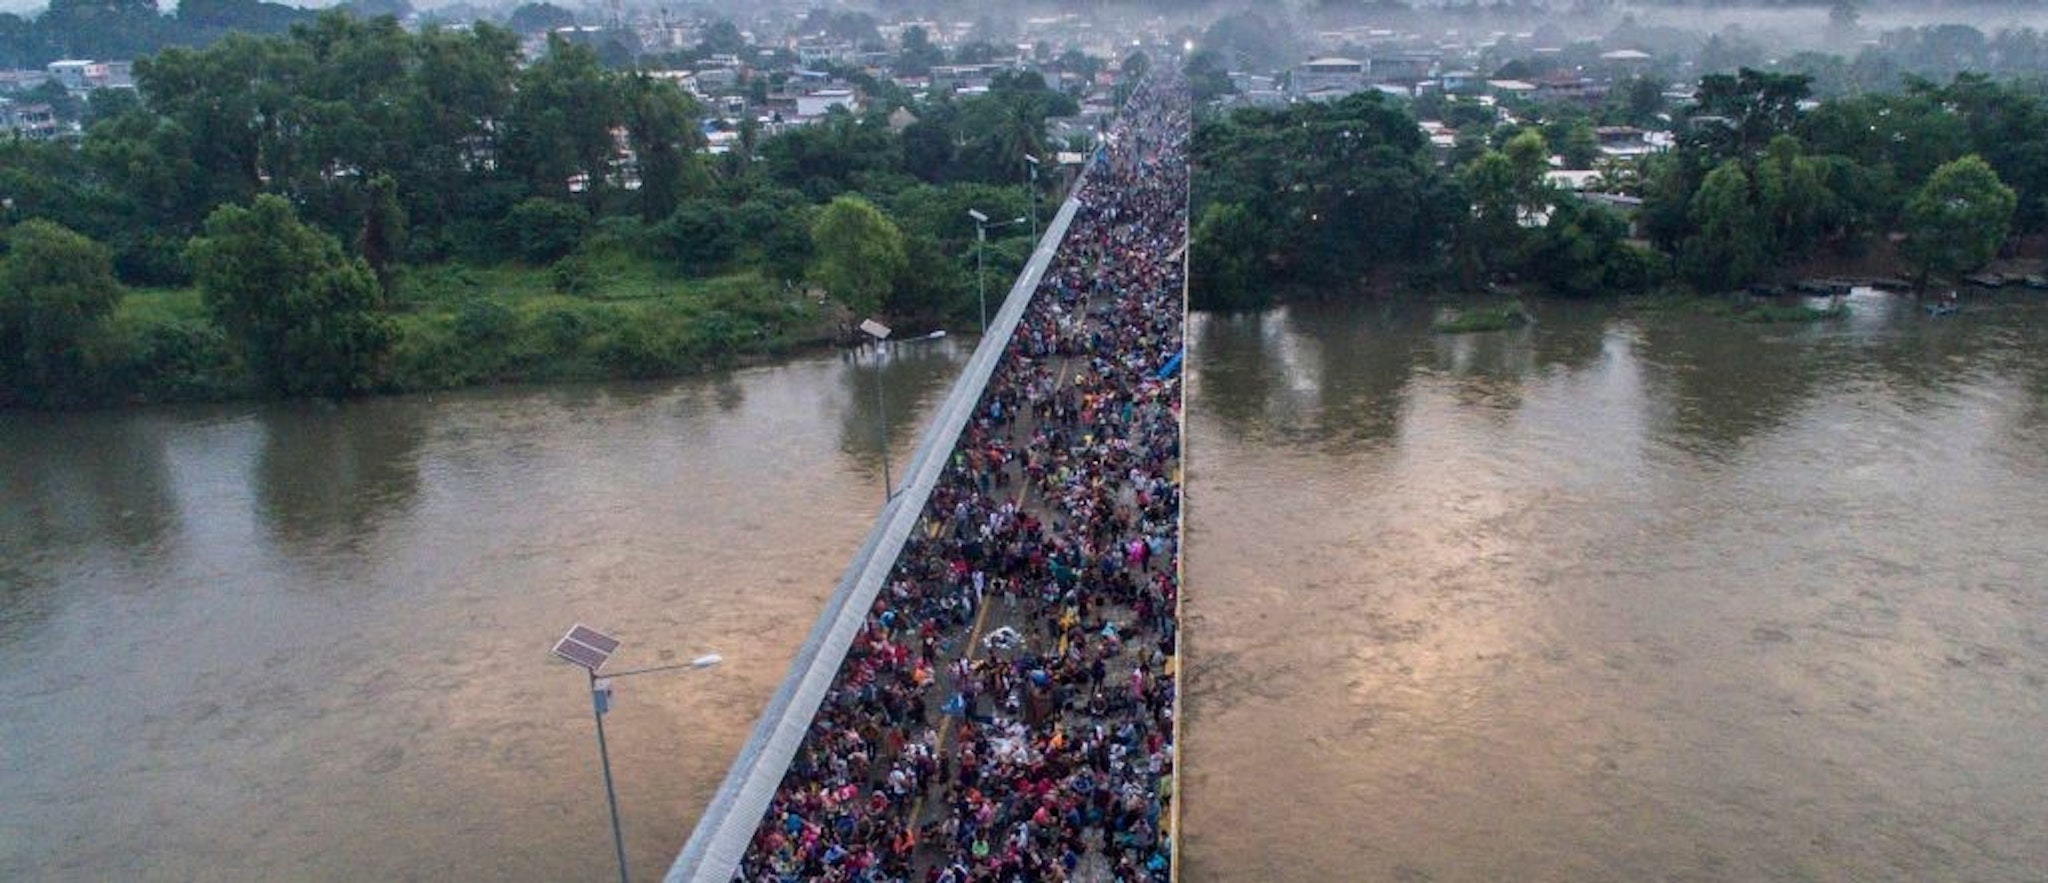 TOPSHOT - Aerial view of a Honduran migrant caravan heading to the US, on the Guatemala-Mexico international border bridge in Ciudad Hidalgo, Chiapas state, Mexico, on October 20, 2018. - Thousands of migrants who forced their way through Guatemala's northwestern border and flooded onto a bridge leading to Mexico, where riot police battled them back, on Saturday waited at the border in the hope of continuing their journey to the United States. (Photo by PEDRO PARDO / AFP) (Photo credit should read